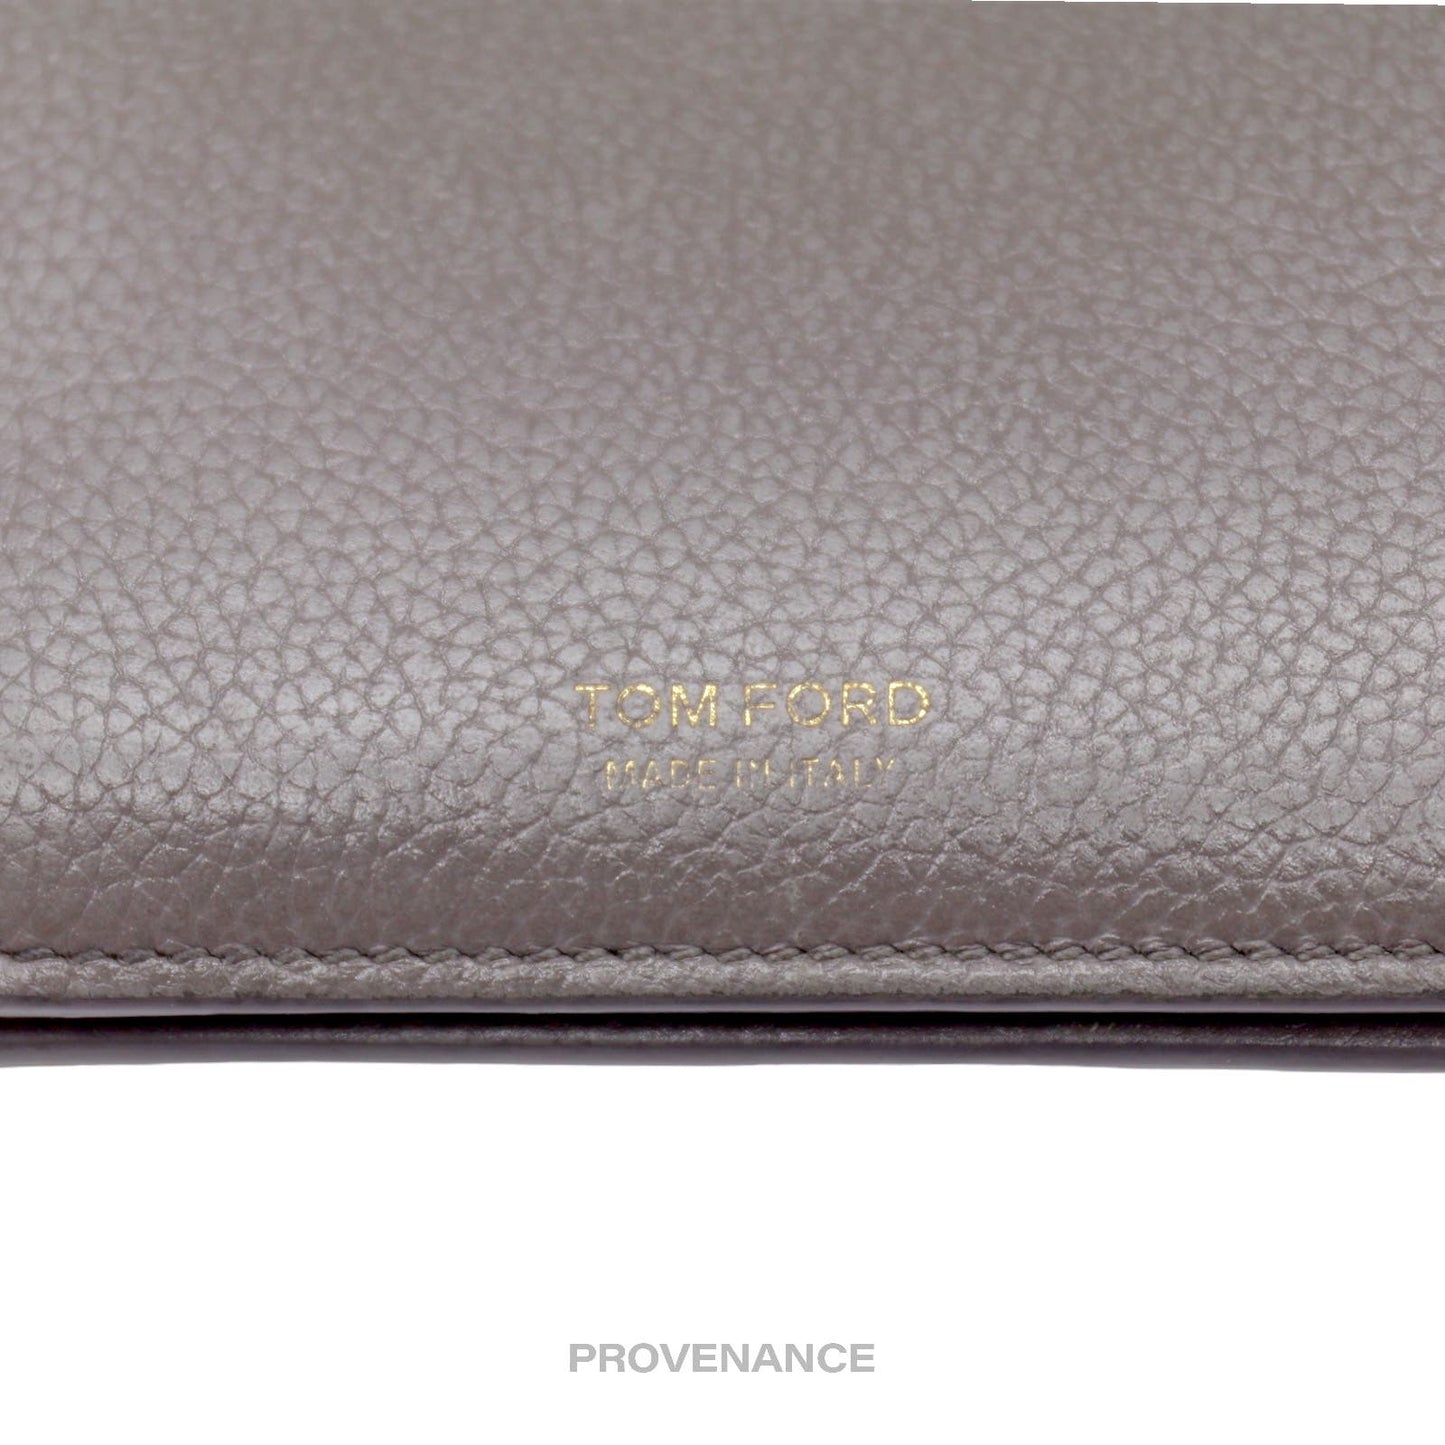 🔴 Tom Ford 8CC Bifold Wallet - Grey Pebble Grain Leather